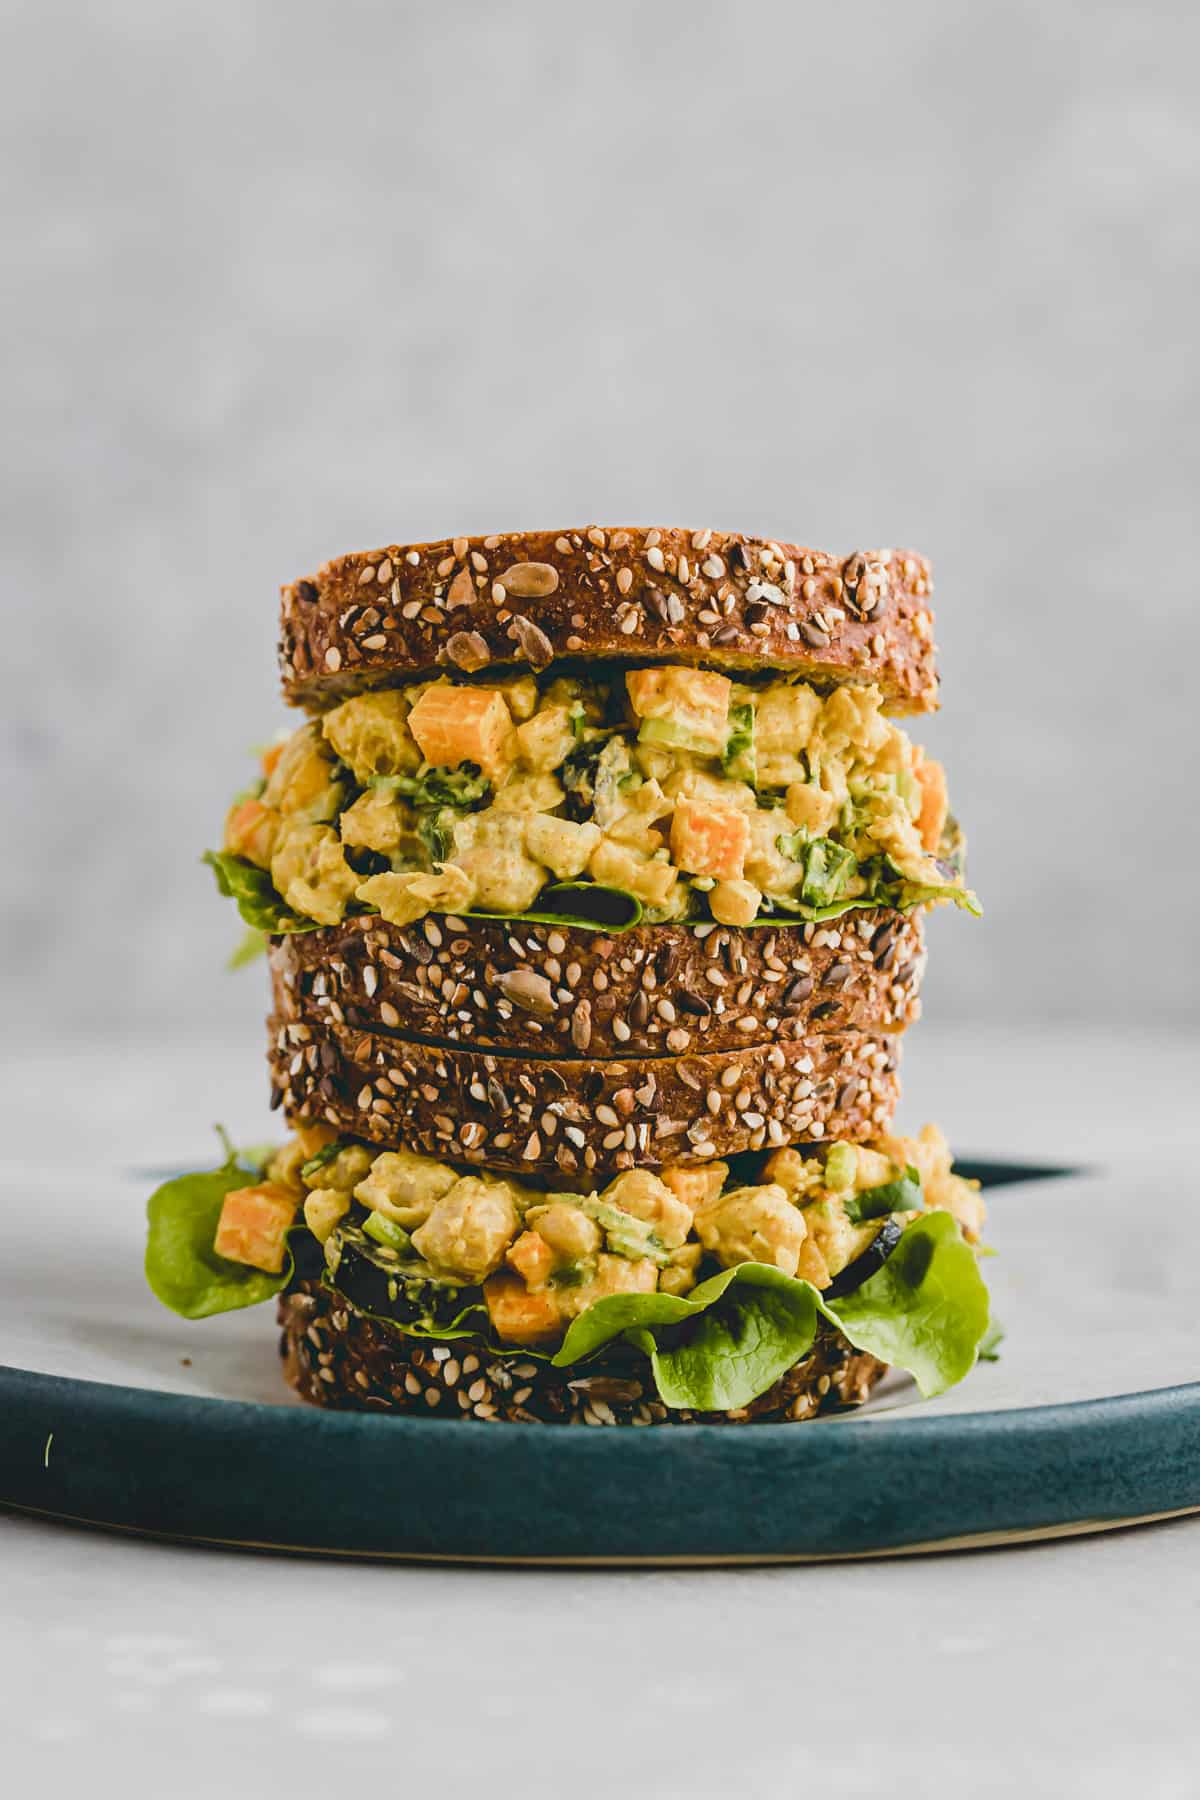 curried chickpea salad sandwich with multigrain bread